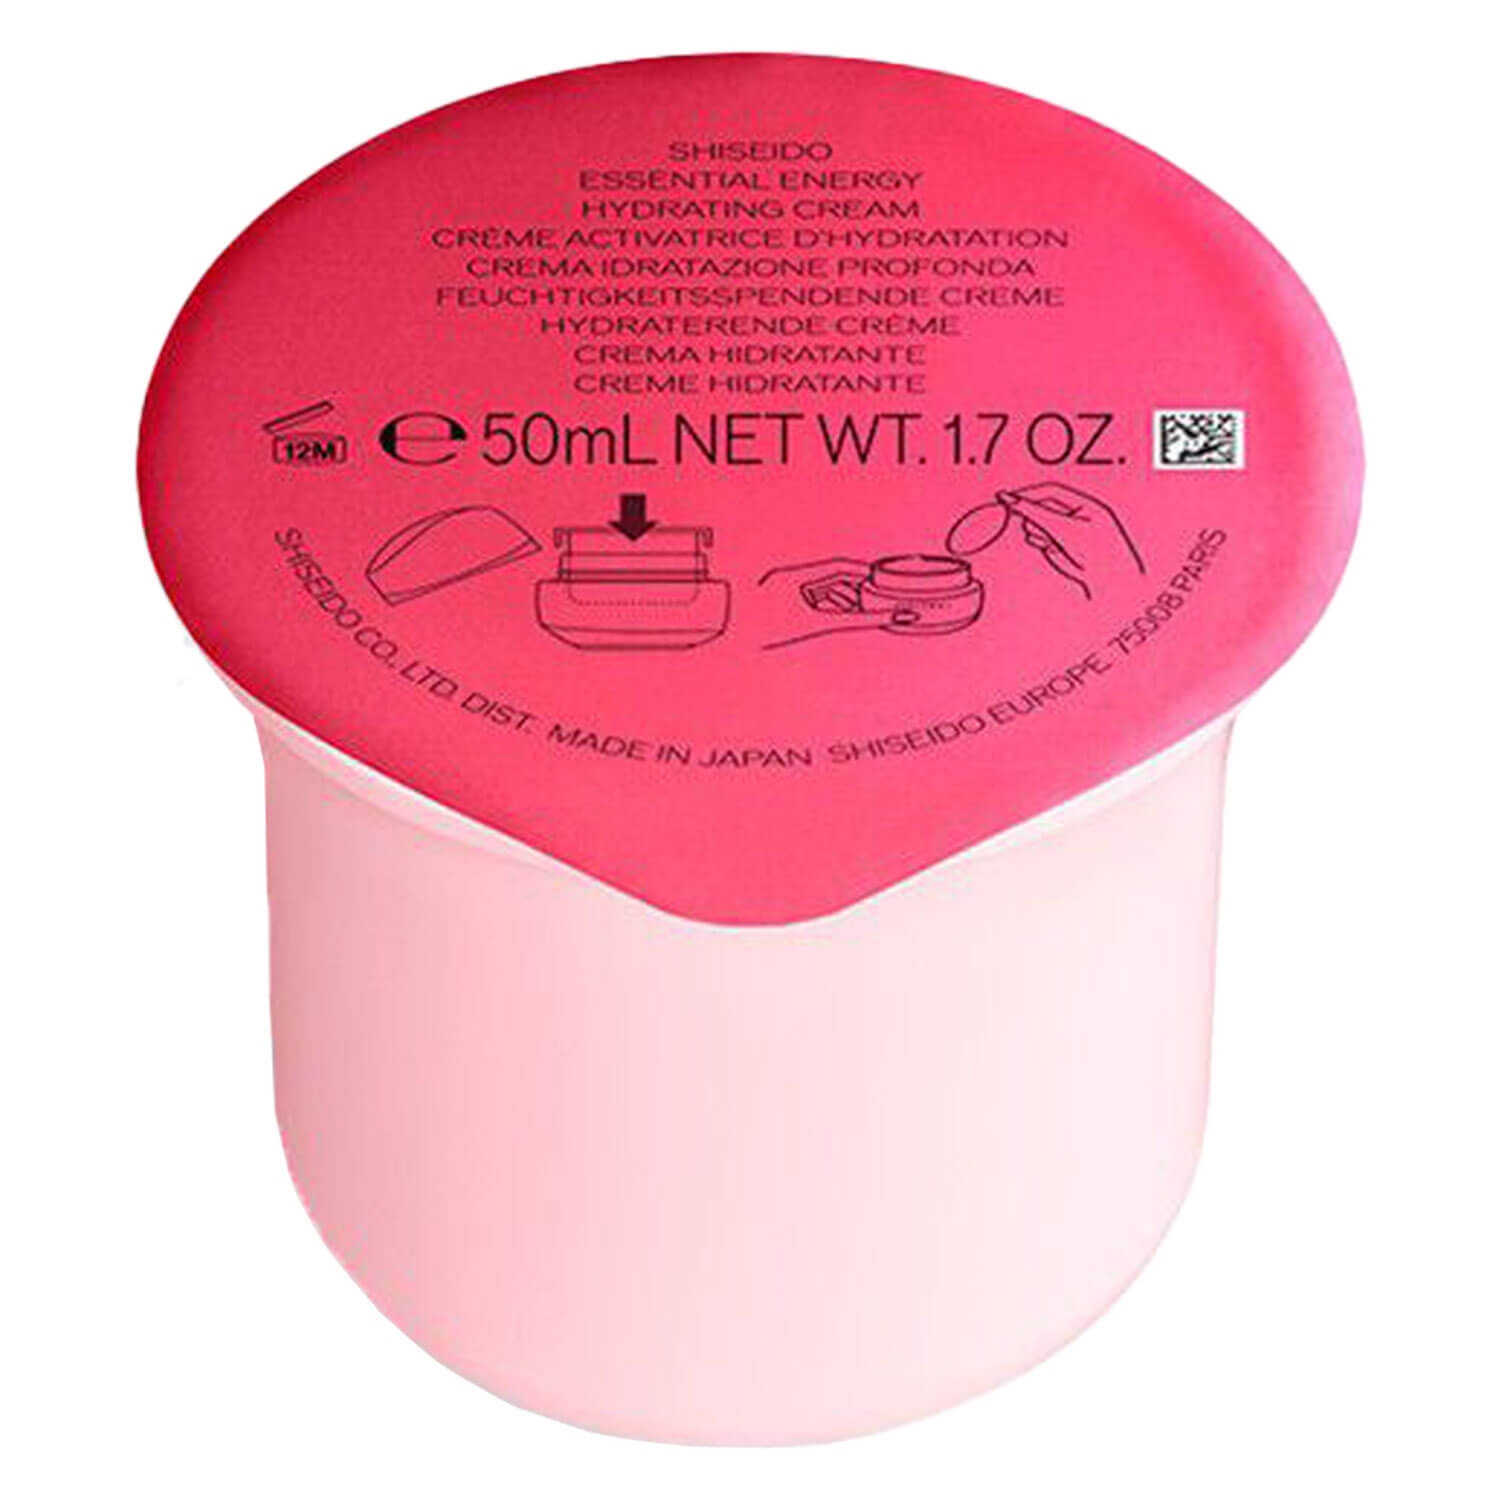 Product image from Essential Energy - Hydrating Cream Refill